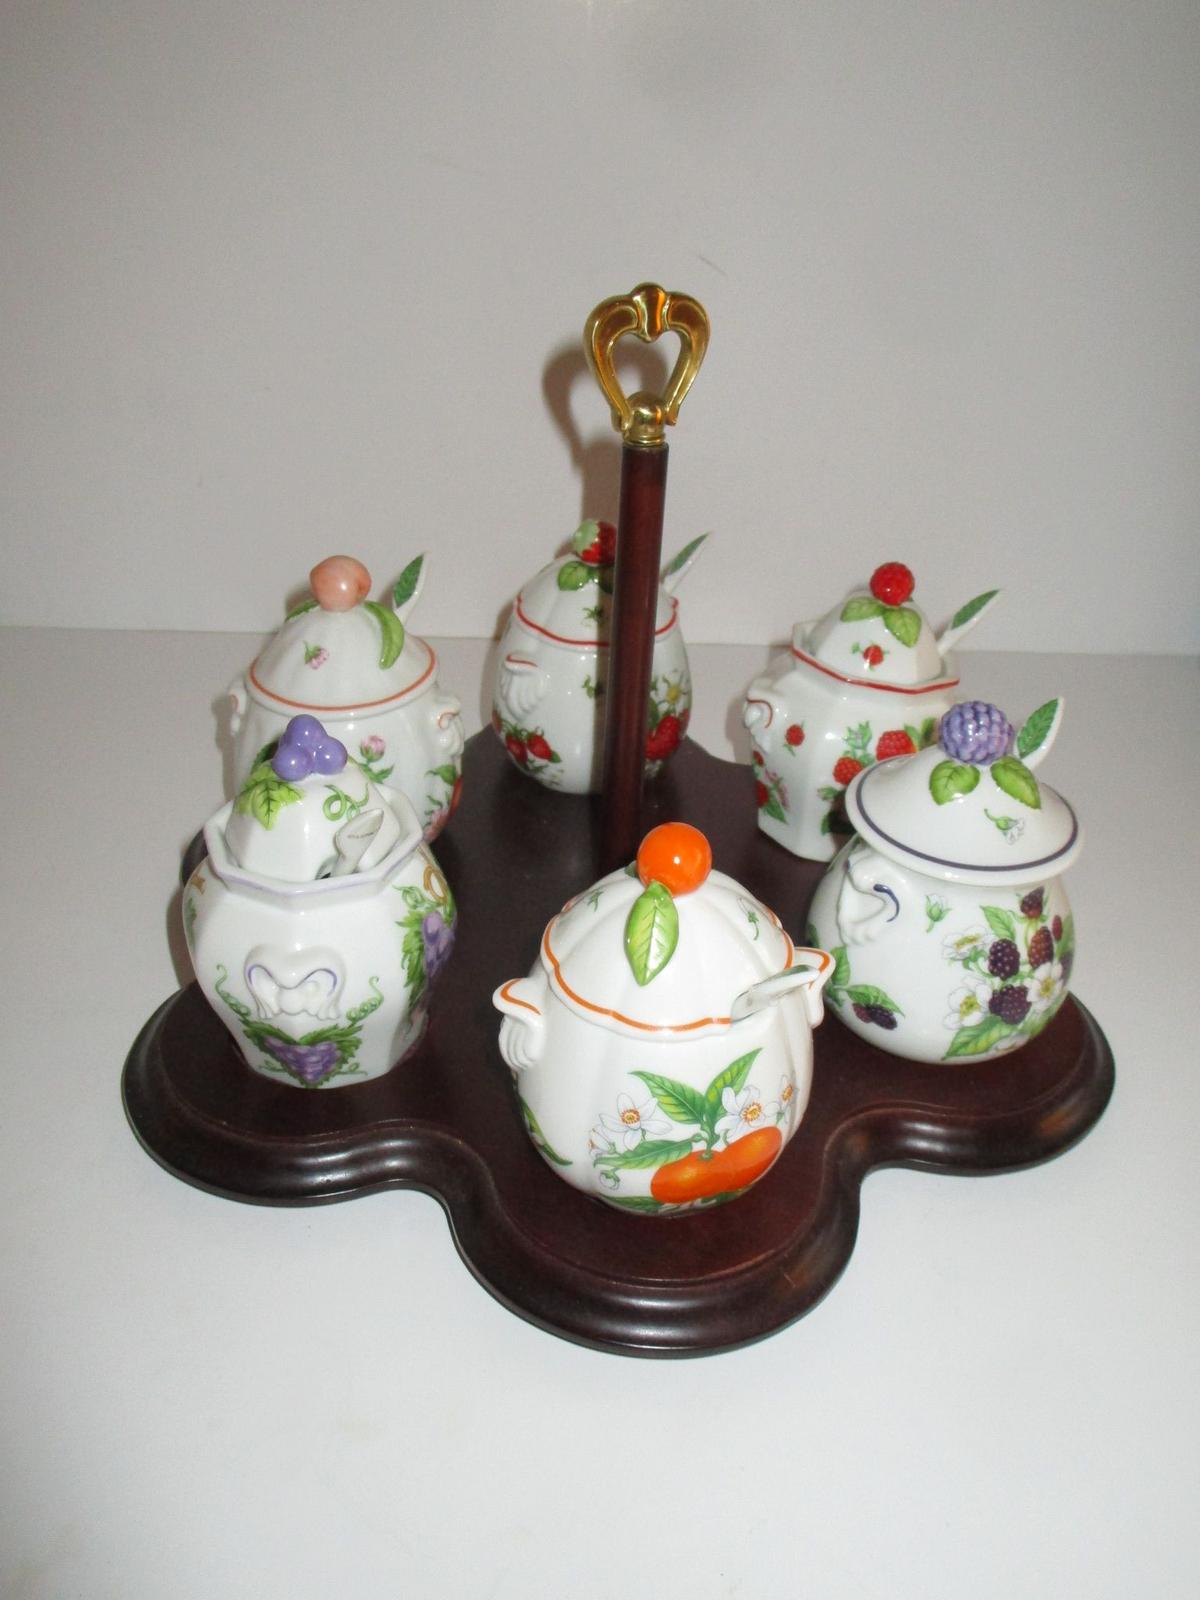 7 Piece Lenox Fine Porcelain Jam Set [all with porcelain spoons]on Wooden Stand - Sweet!